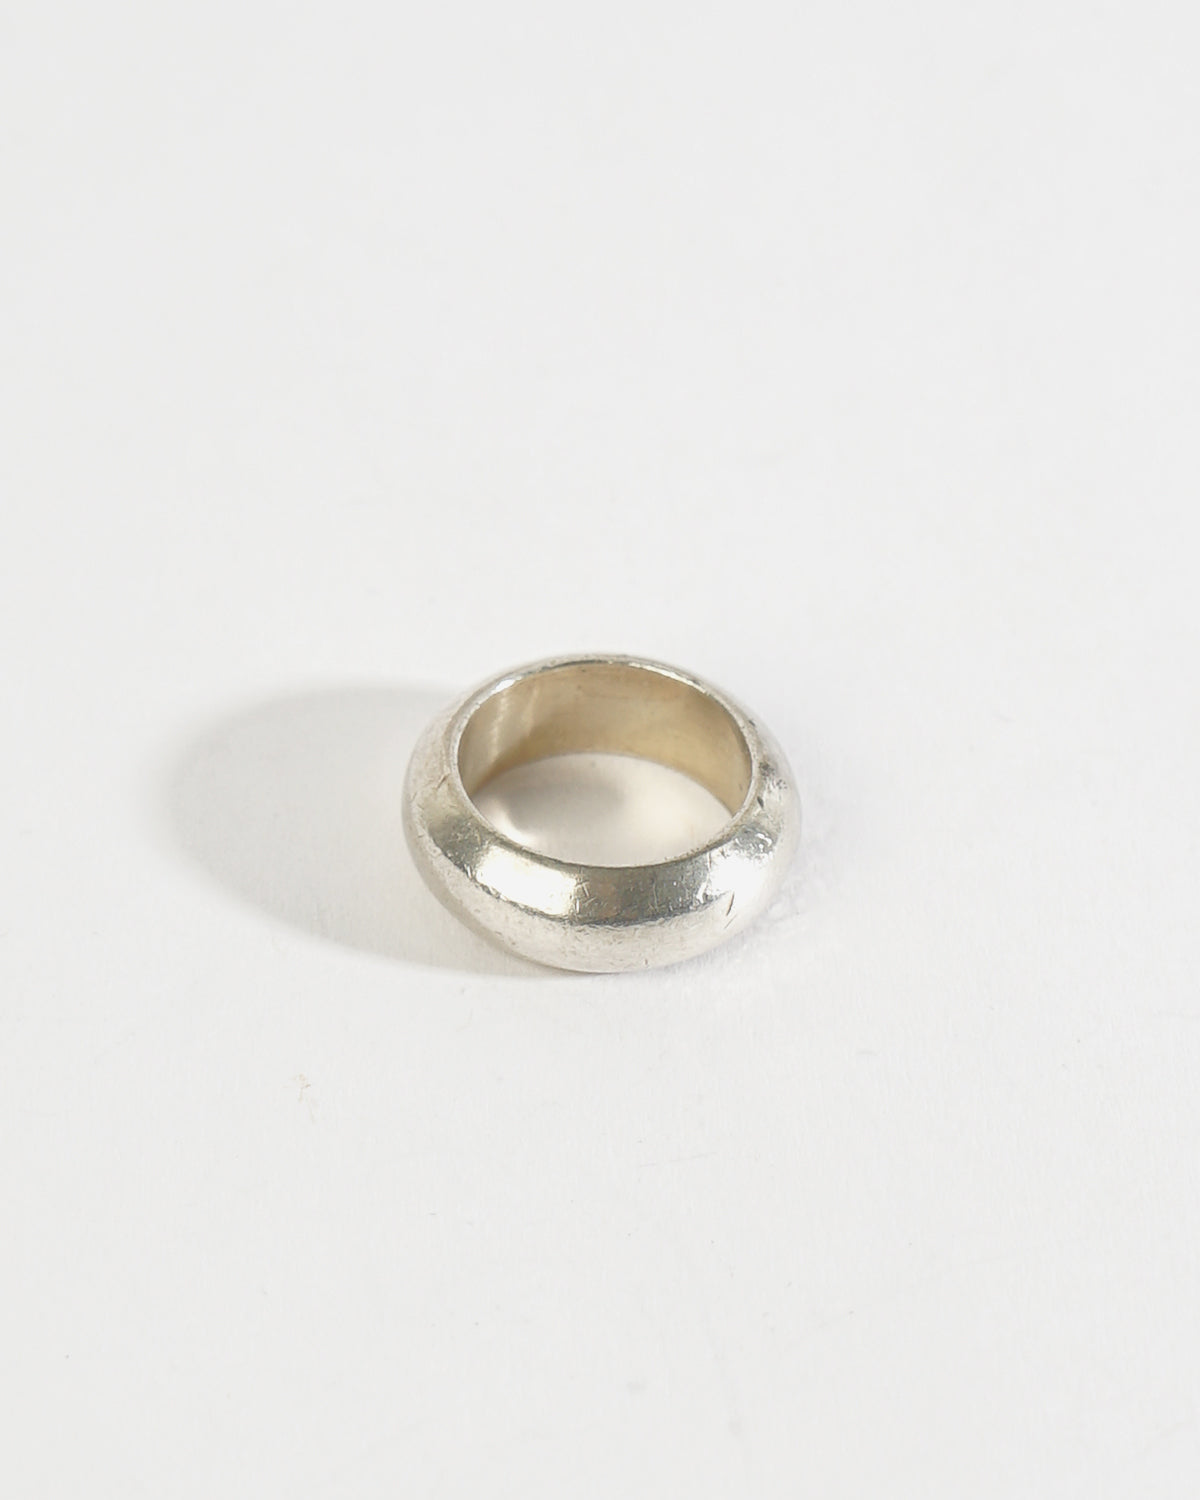 Silver Band Ring / size: 8.5